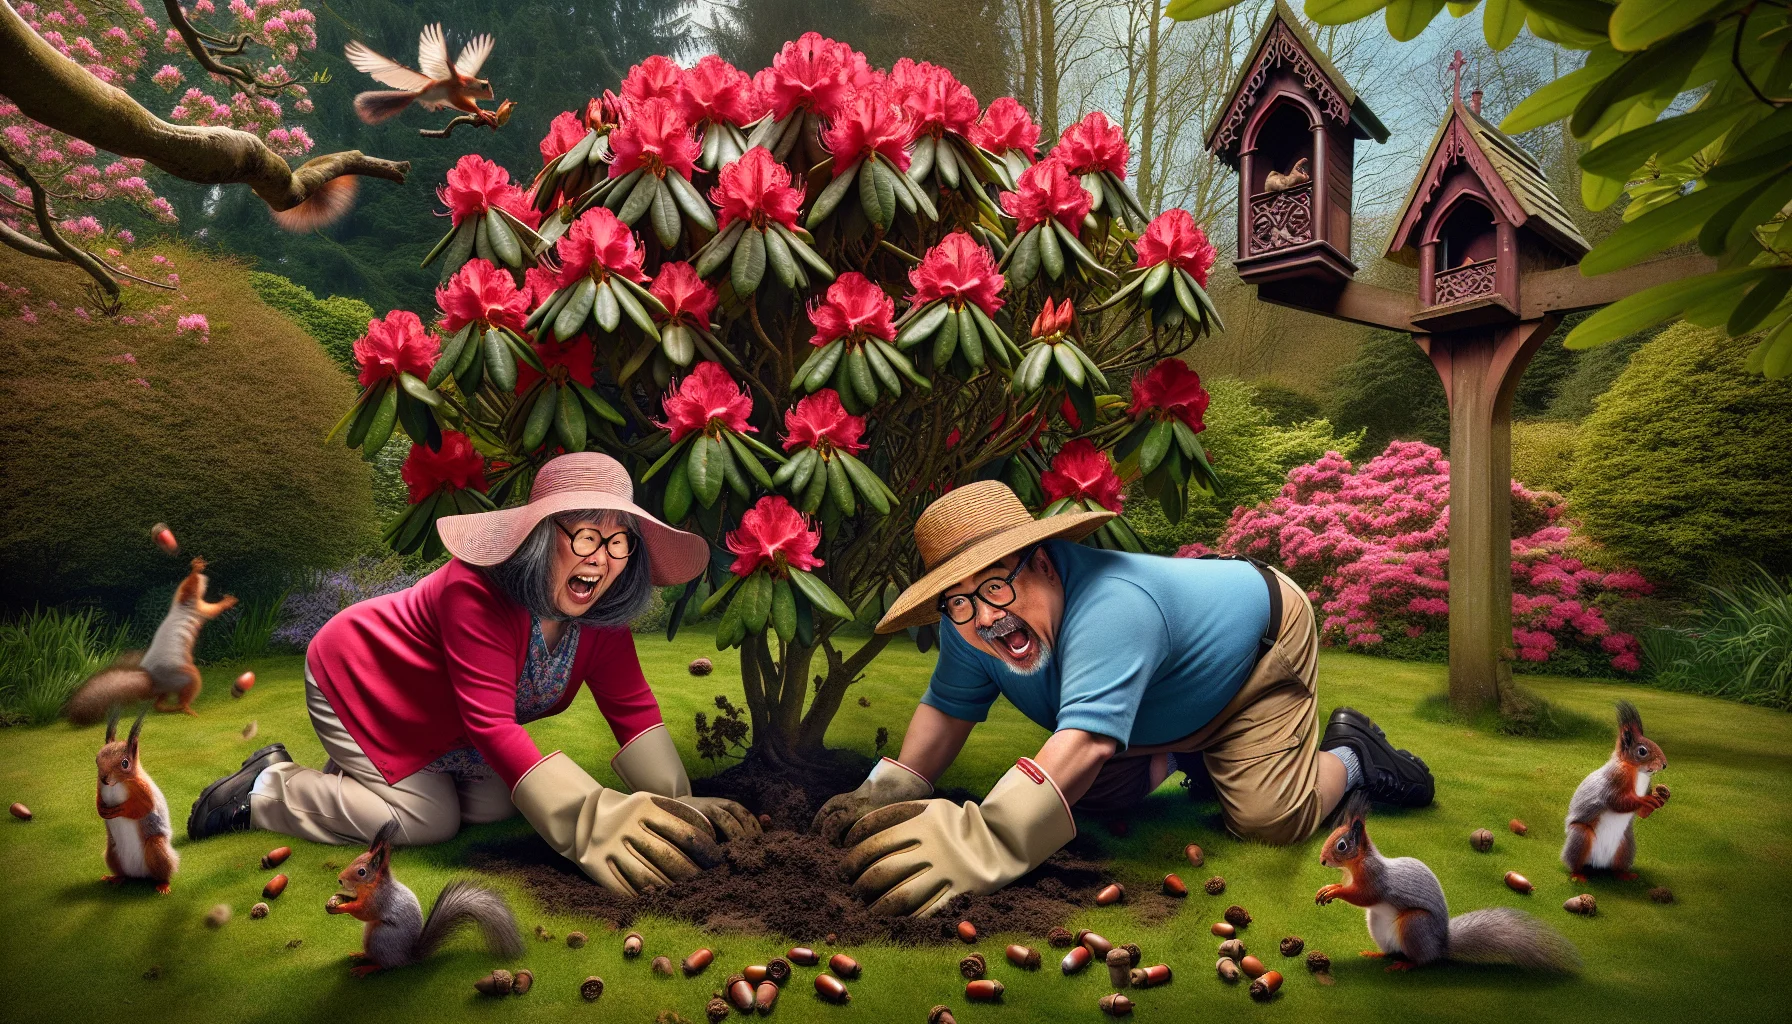 Imagine a humorous scene set in a lush garden. In the center, an East Asian woman and a Middle Eastern man are kneeling on the grass, struggling to root a particularly large rhododendron bush into the ground. They're wearing oversized gardening gloves and sunhats, looking comically unprepared for the task. Around them, playful squirrels are tossing acorns, adding to their challenge. The rhododendron is bearing vibrant red flowers. In the background, a Gothic-style birdhouse hangs from a tree, housing a family of tweeting birds. The image sends an inviting message about the joy and comedy inherent in nature and gardening.